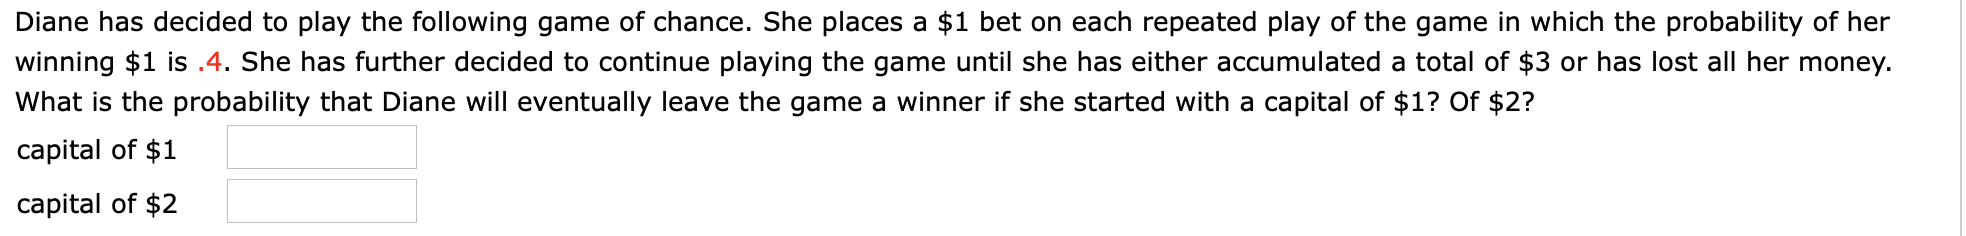 Diane has decided to play the following game of chance. She places a $1 bet on each repeated play of the game in which the probability of her
winning $1 is .4. She has further decided to continue playing the game until she has either accumulated a total of $3 or has lost all her money.
What is the probability that Diane will eventually leave the game a winner if she started with a capital of $1? Of $2?
capital of $1
capital of $2
